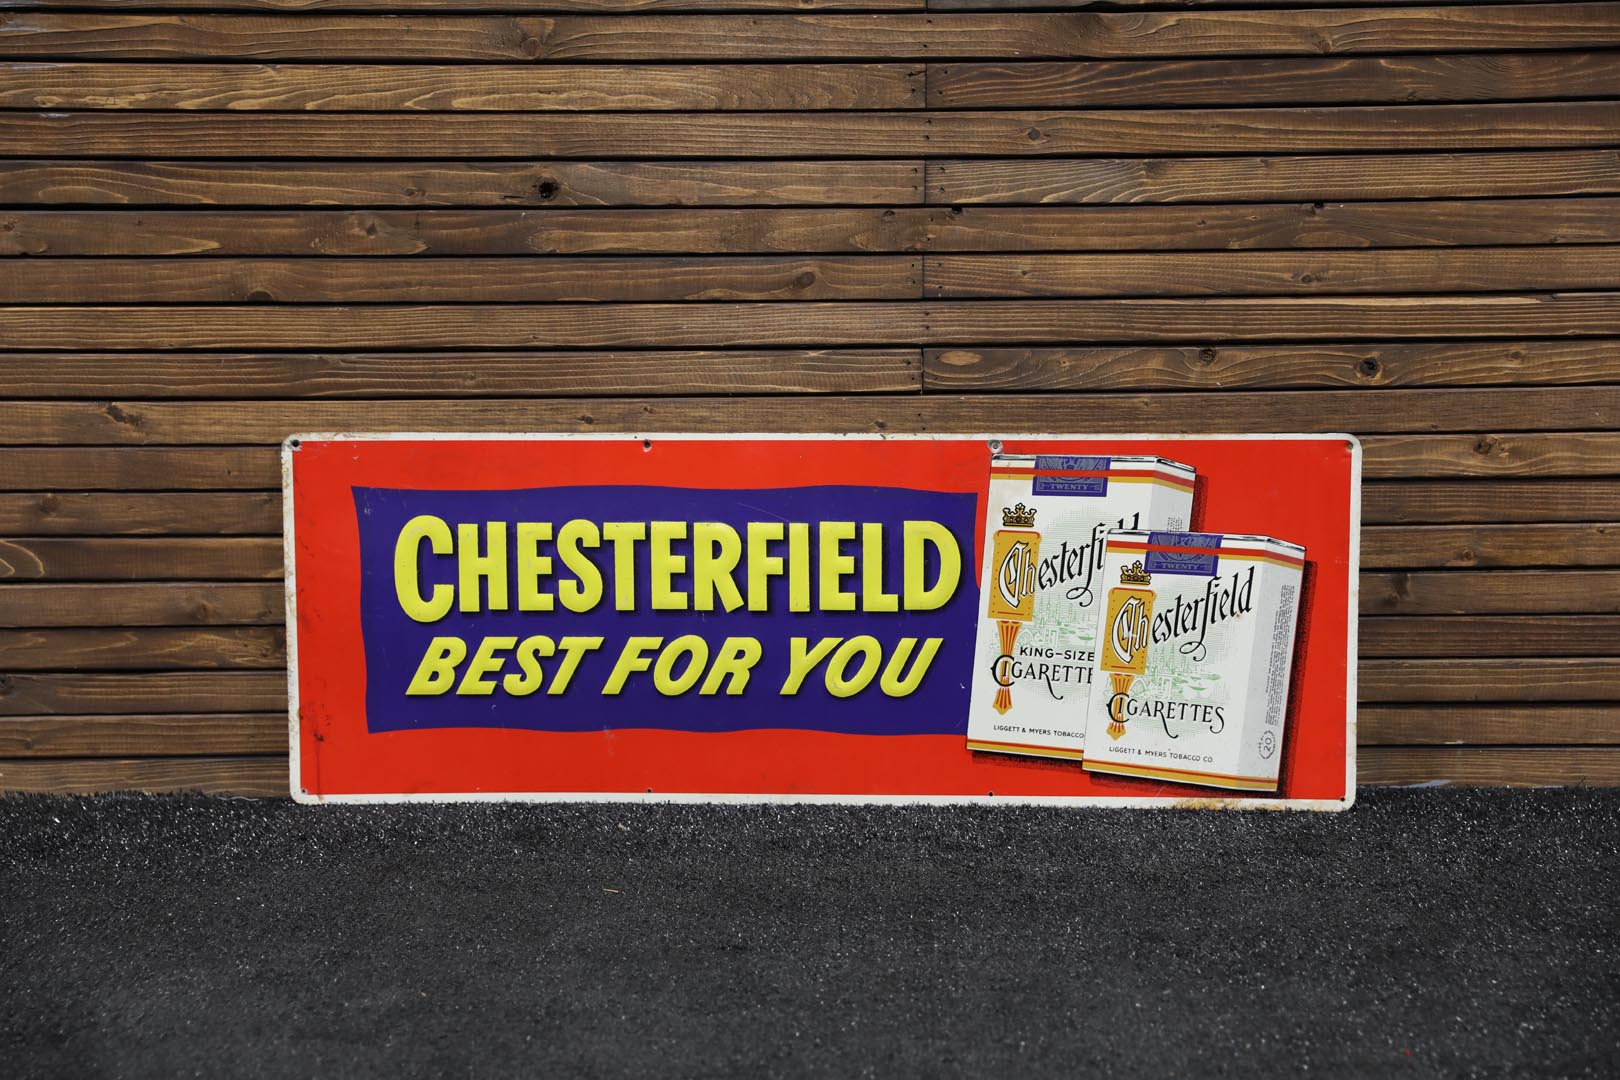  Chesterfield Cigarettes Emboss ed Tin Sign 